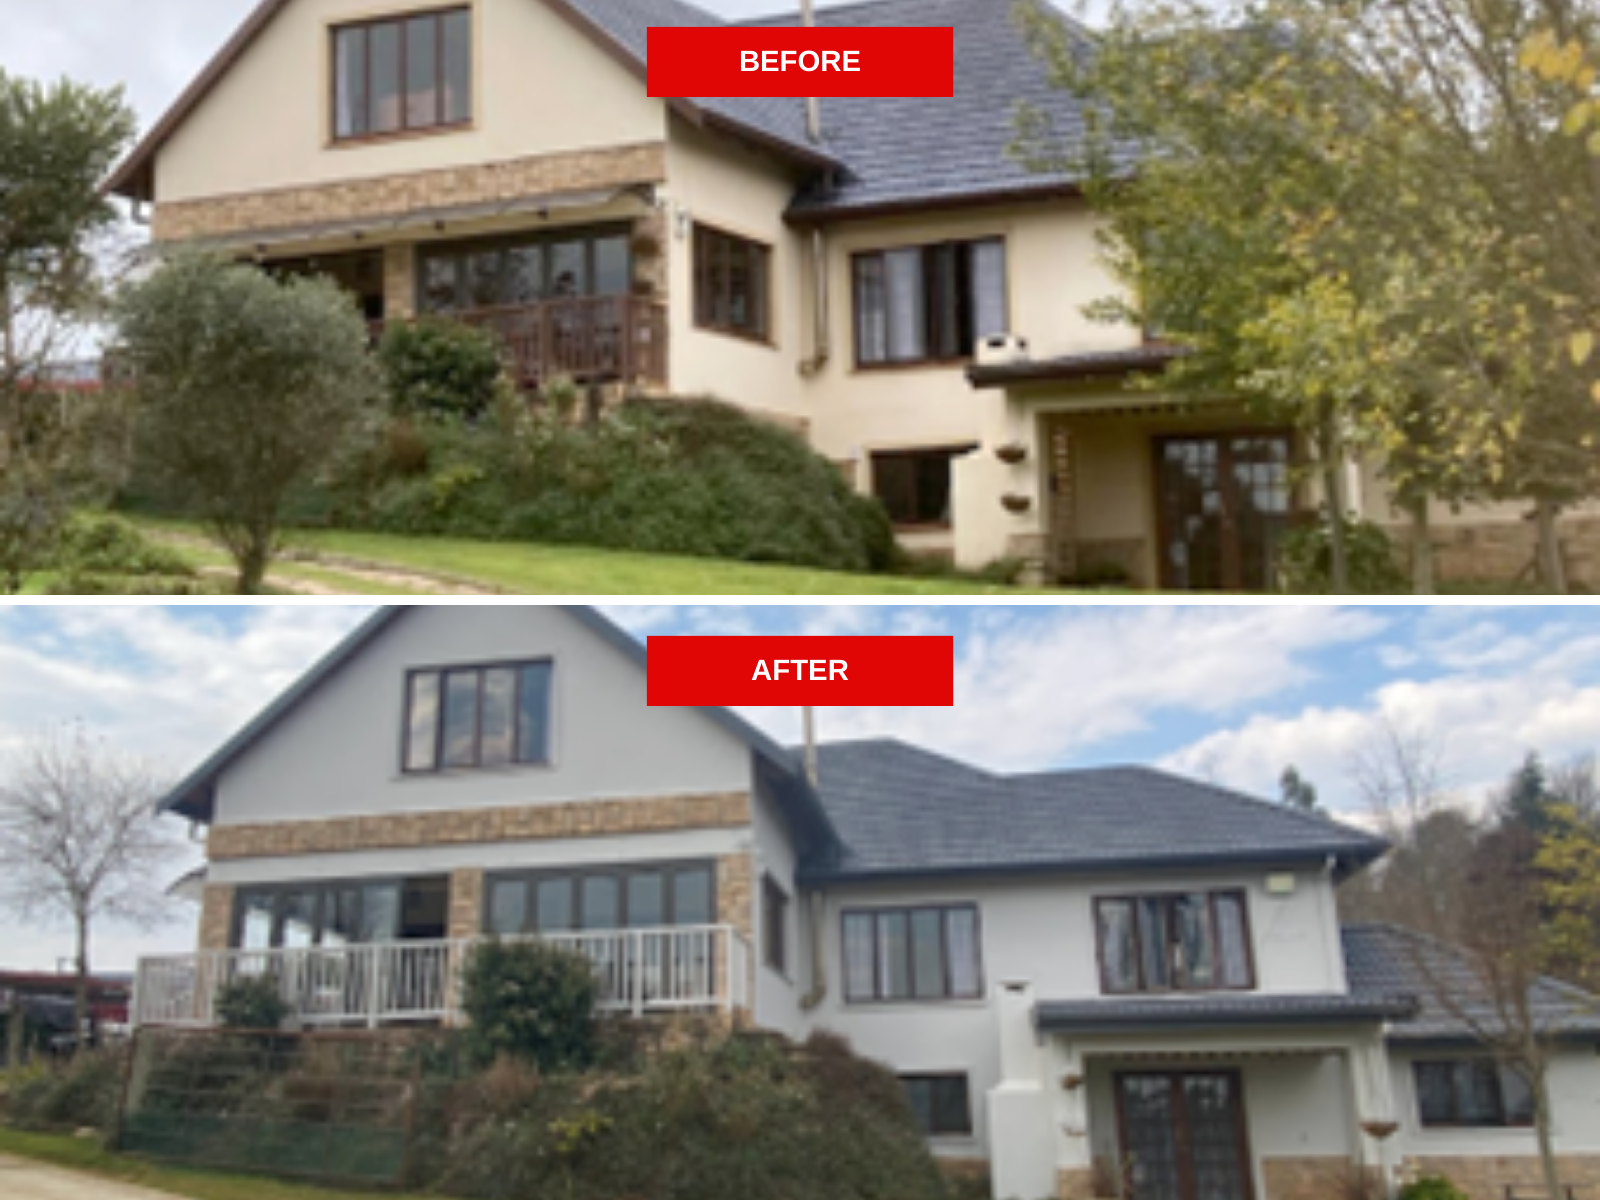 Underburg, KZN - Residential exterior walls and roof painting.